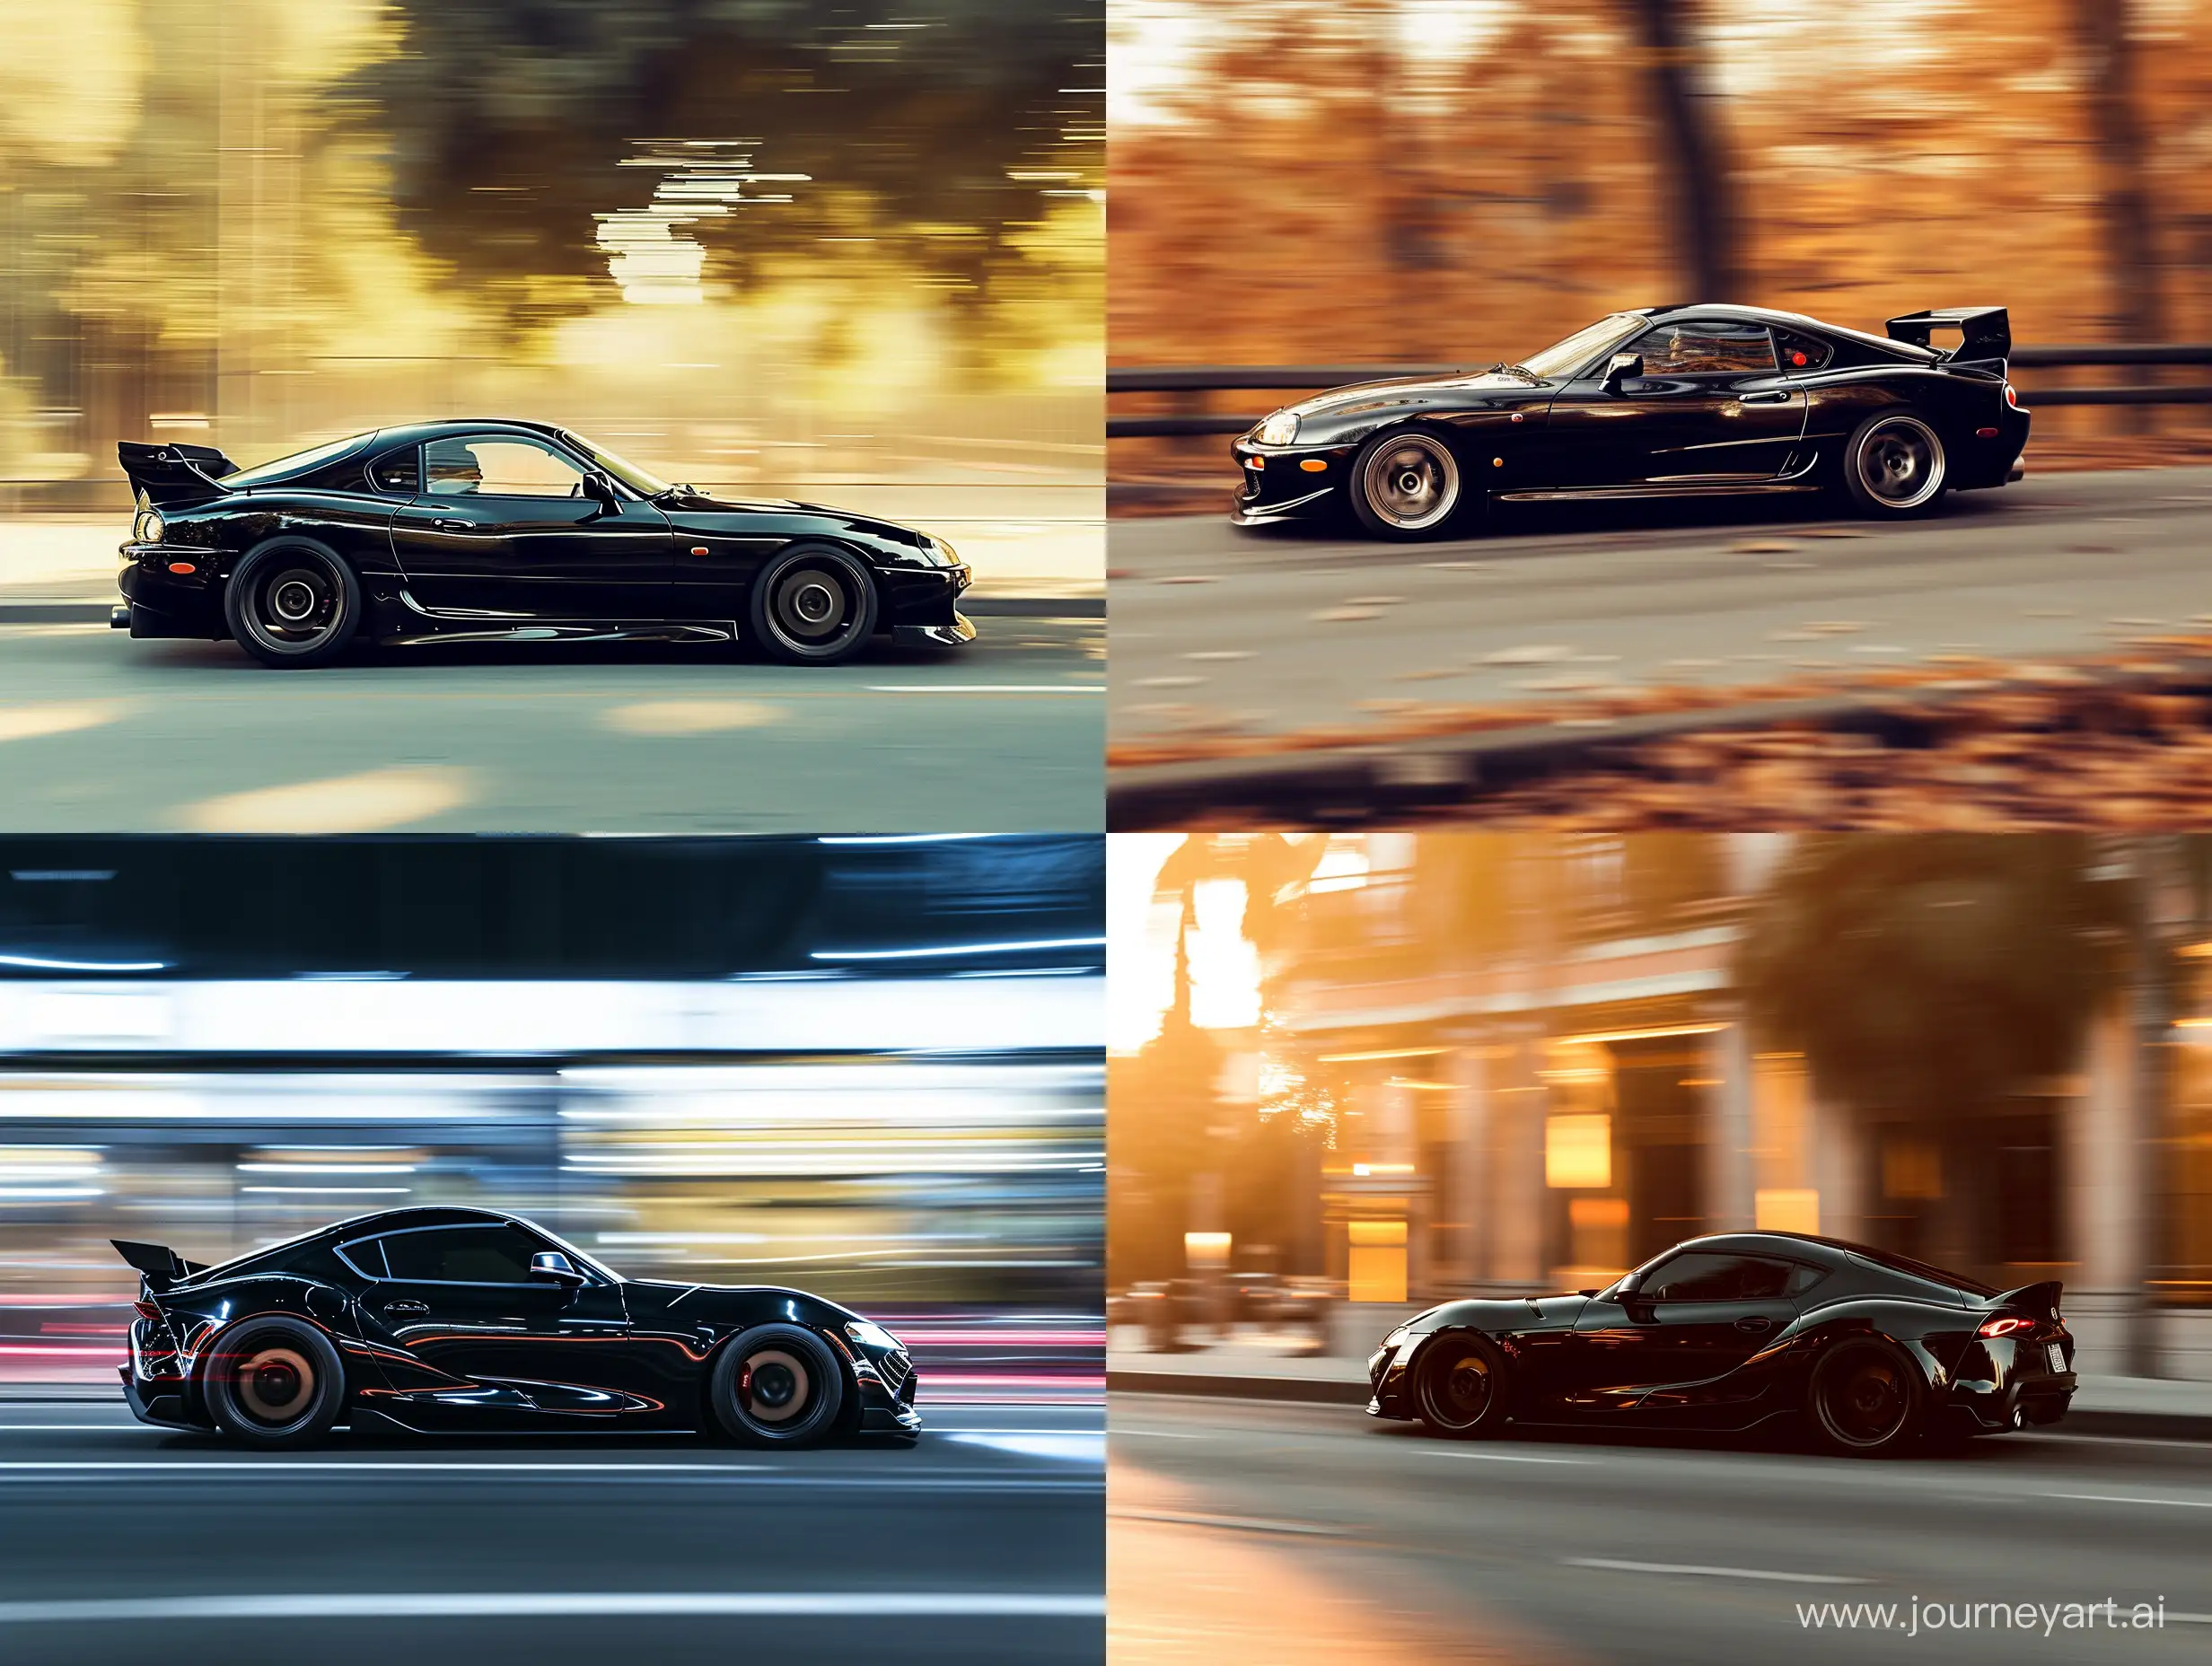 Supra-MK4-Car-in-Black-Color-Captured-with-Panning-Effect-Photography